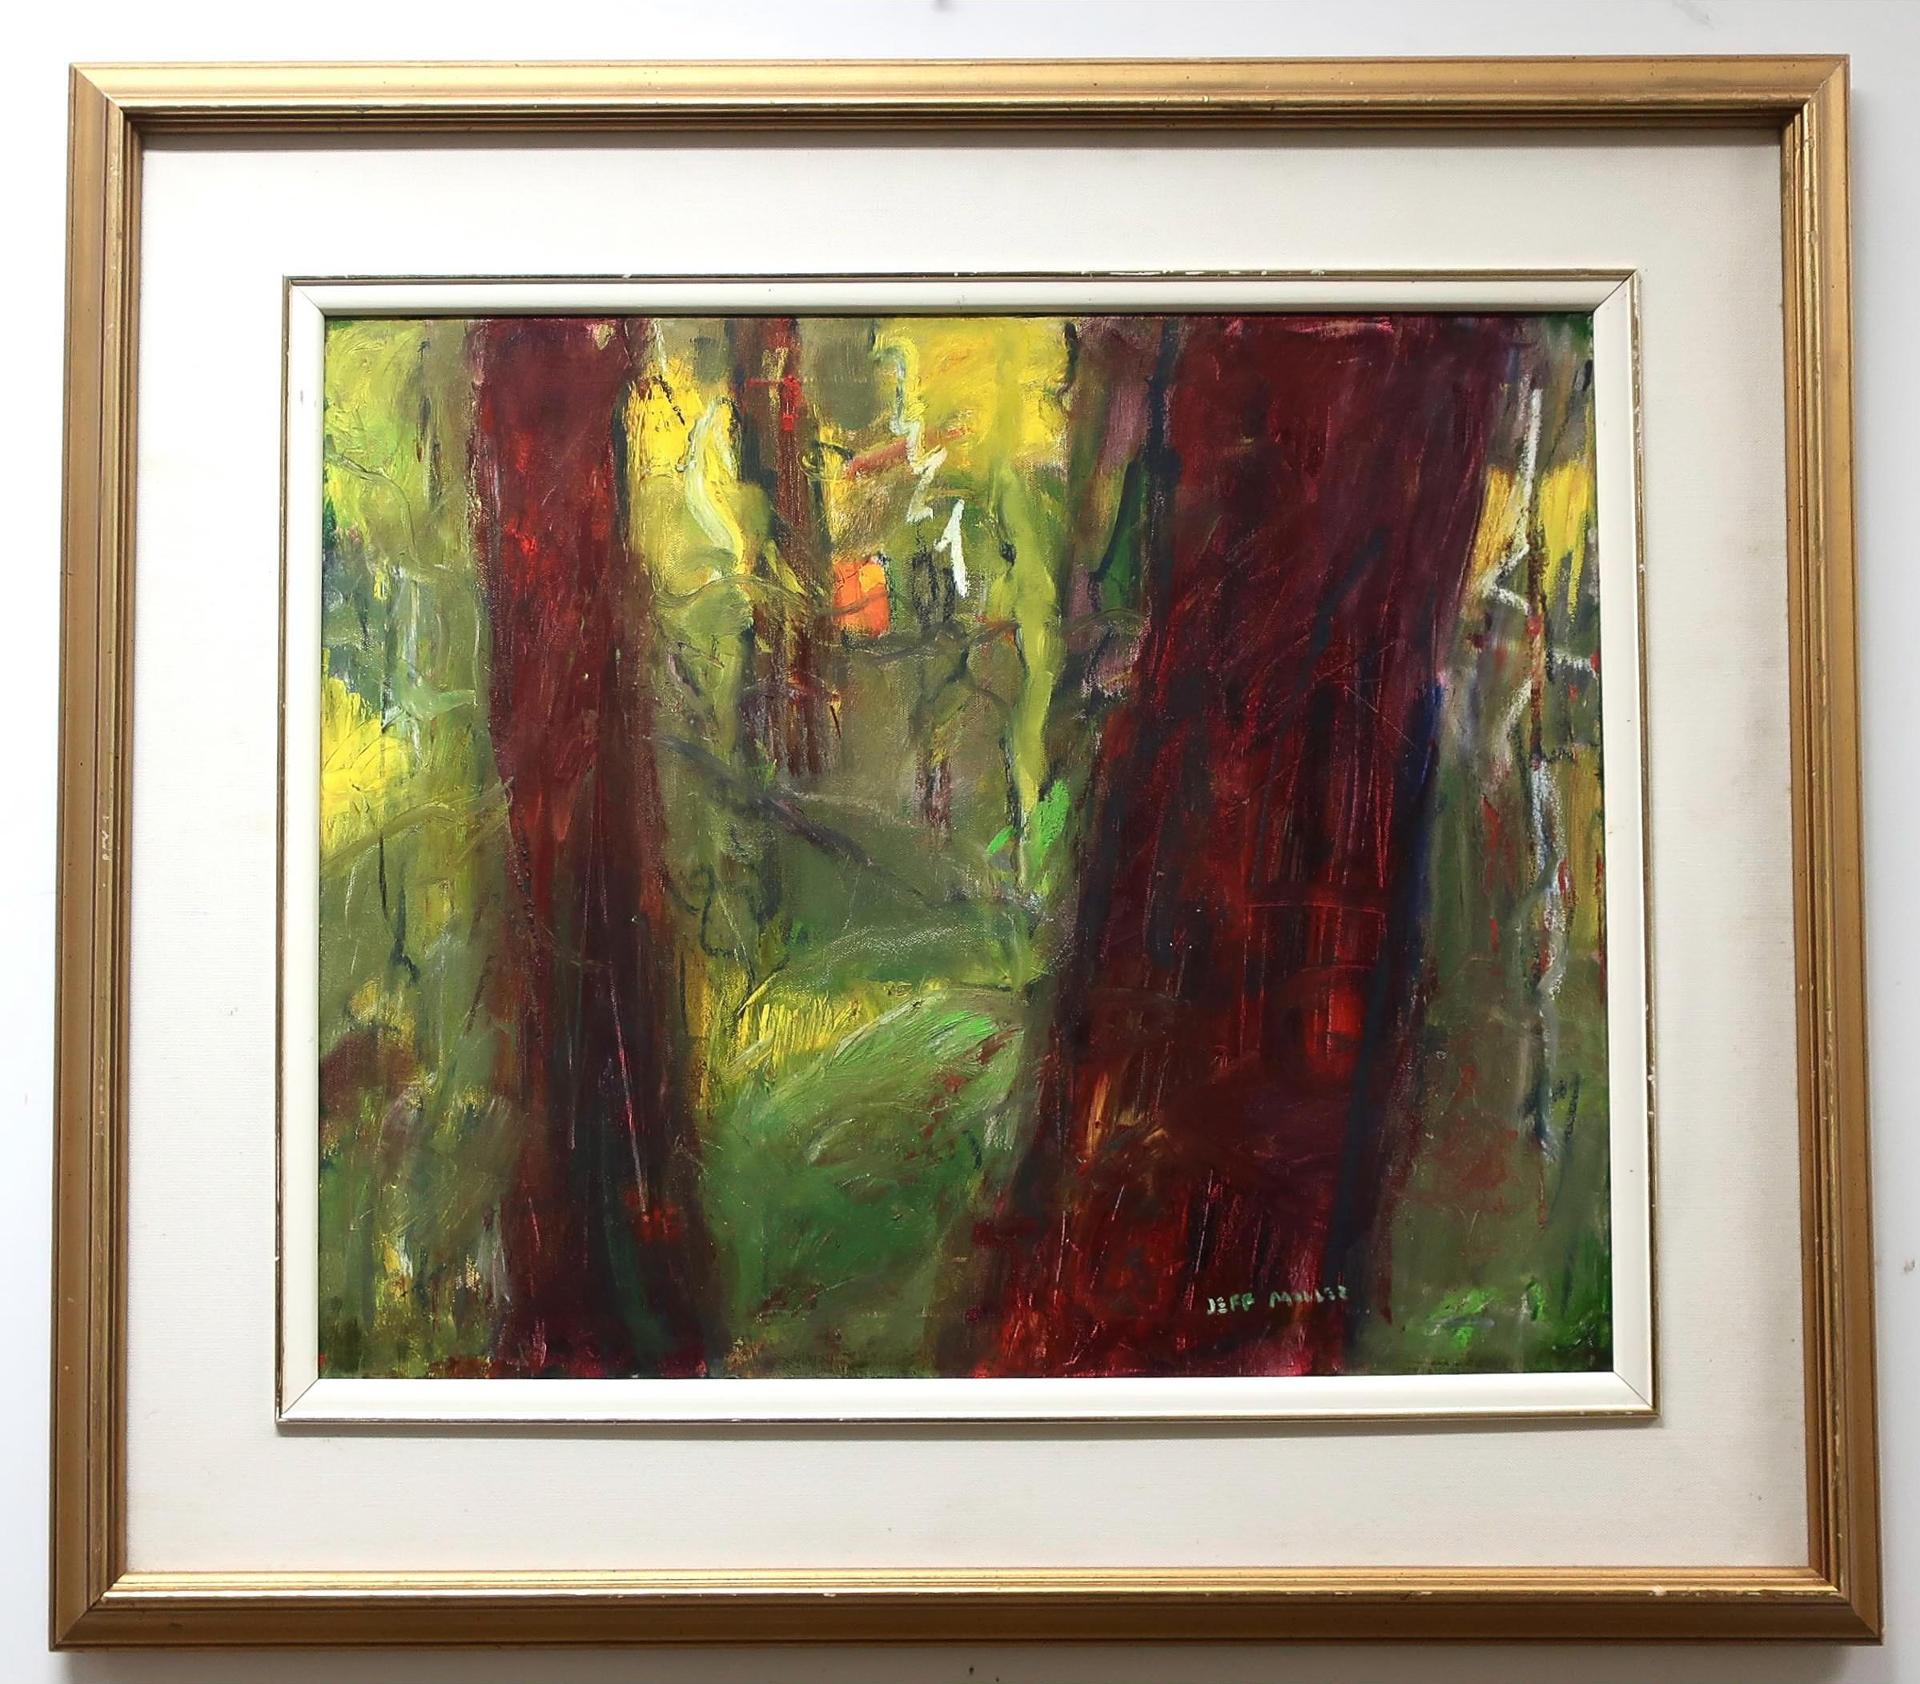 Jeff Miller (1931) - Light In The Woods (Algonquin Abstract Series No. 9)